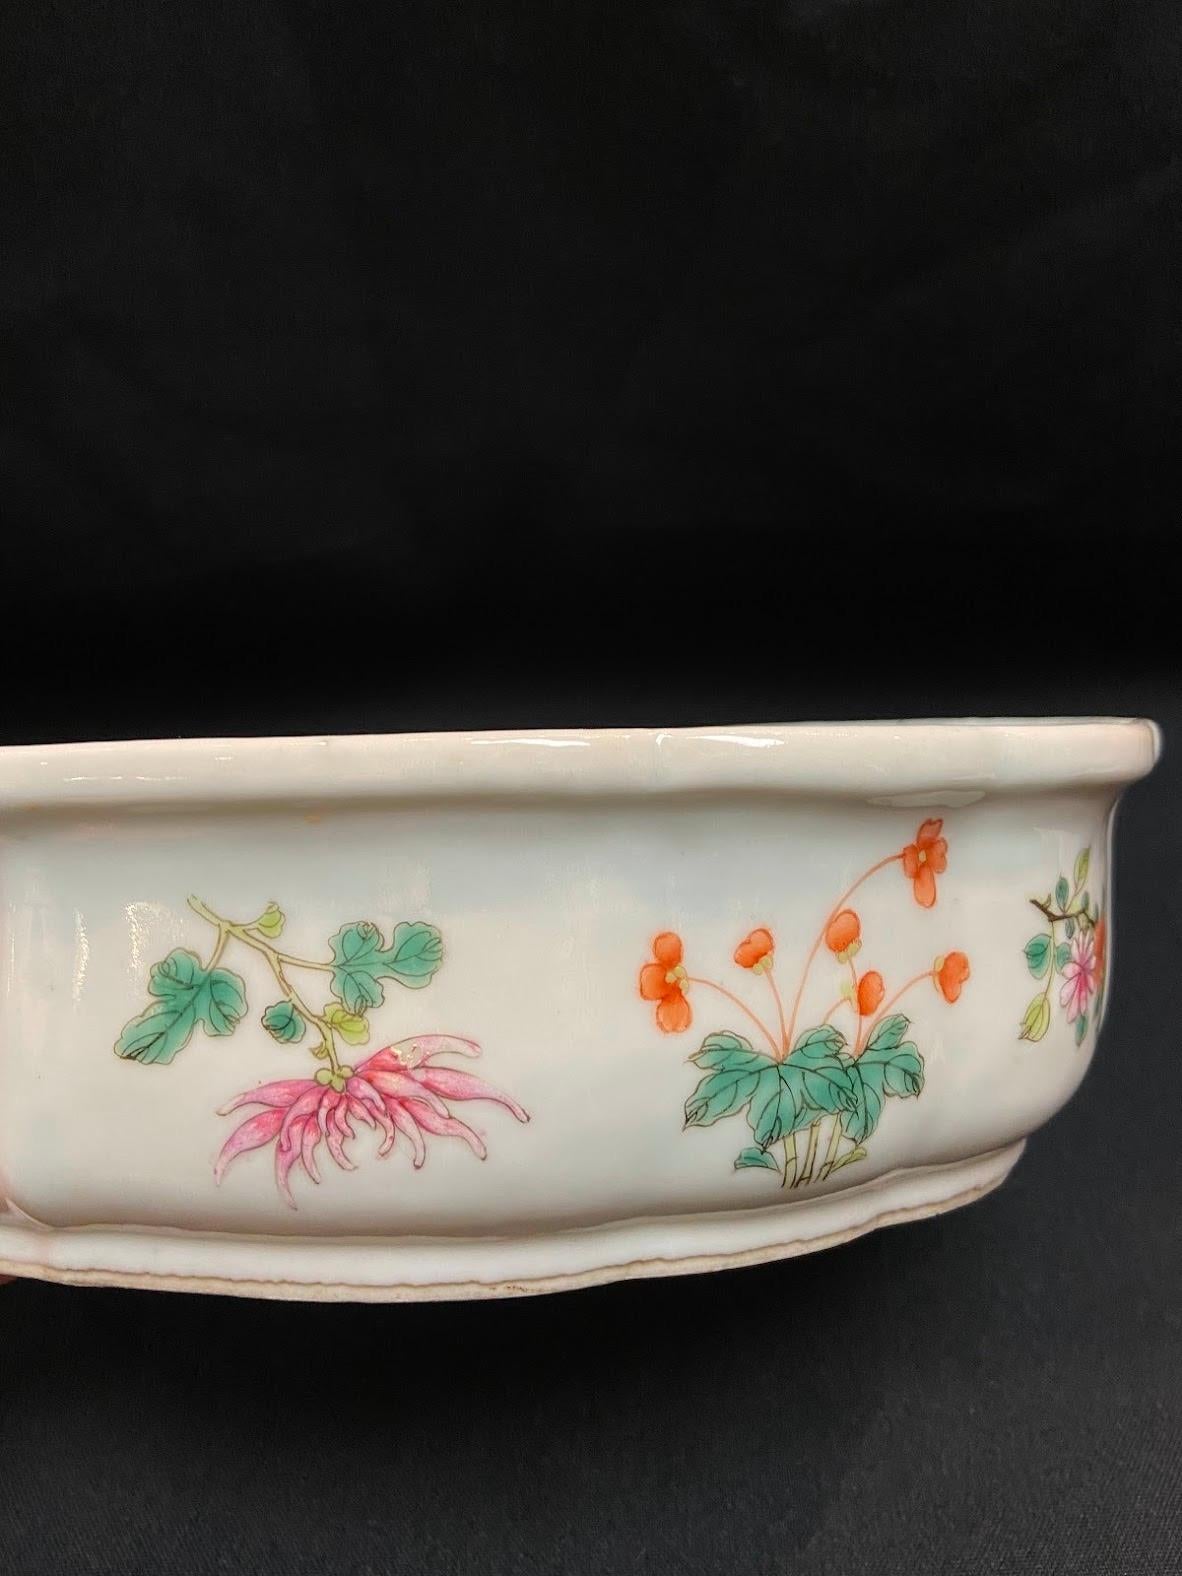 Republic of China, Chinese antique Famille rose floral painting porcelain narcissus bowl / ??,??????2? (??)
Condition: Shows normal sign of wear and use, No damage or crack. 
Material: famille rose Porcelain
Approximate size: H:7cm, L:28cm,